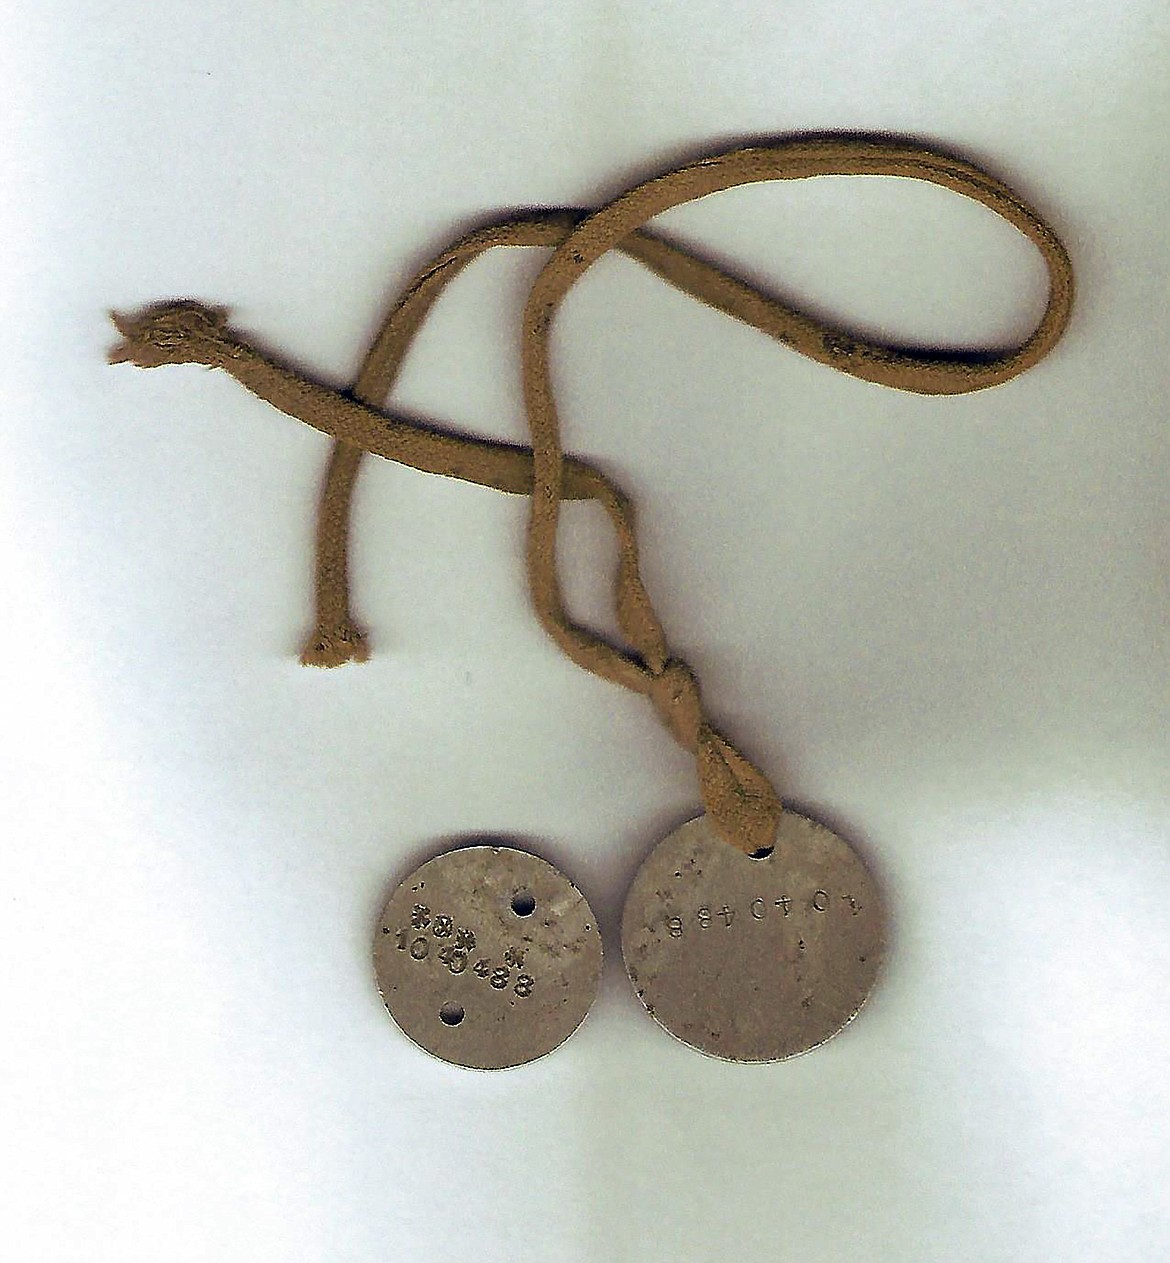 A photo of Harry F. Clark's dog tags from World War I.